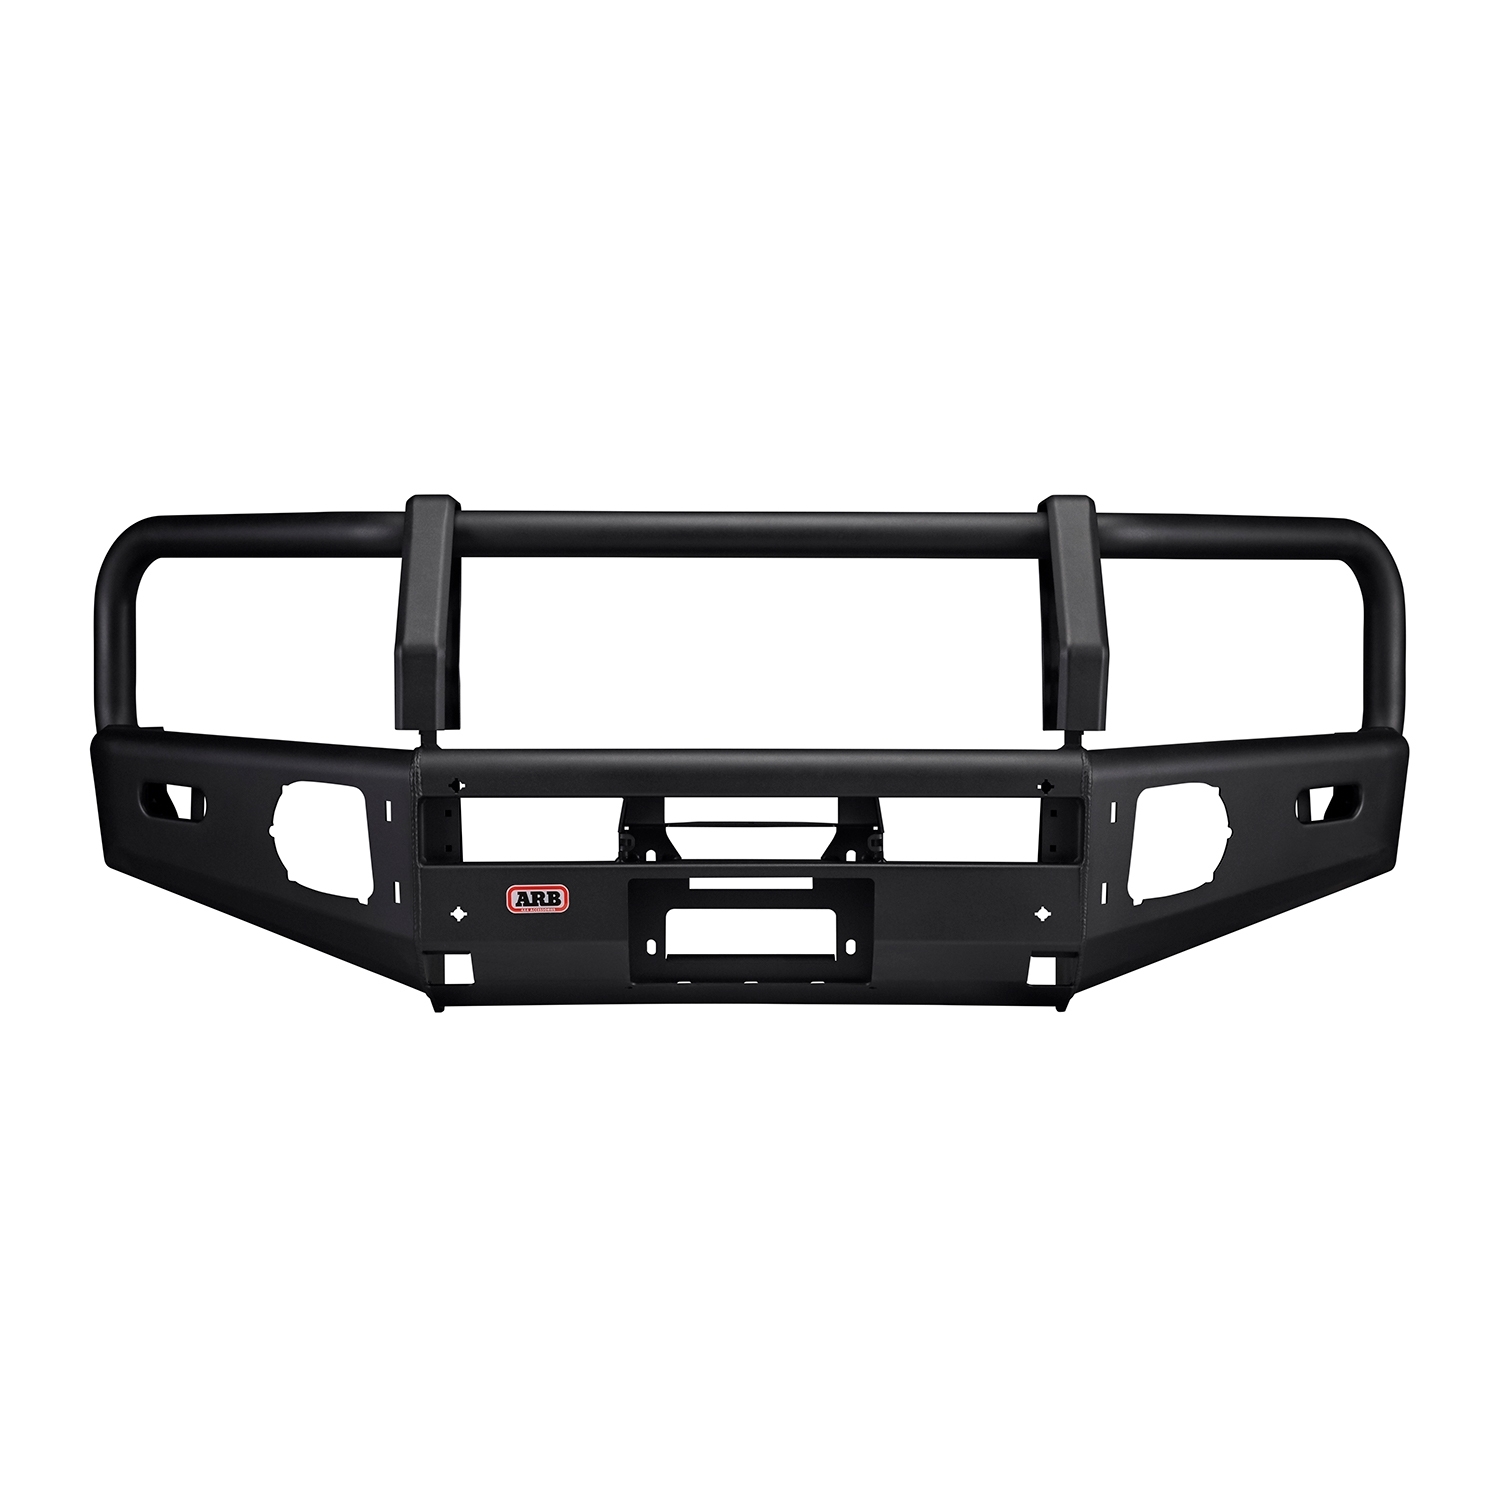 Arb Summit Front Winch Bumper For 2020-2021 Toyota Tacoma, Integrit Black Textured Powder Coat